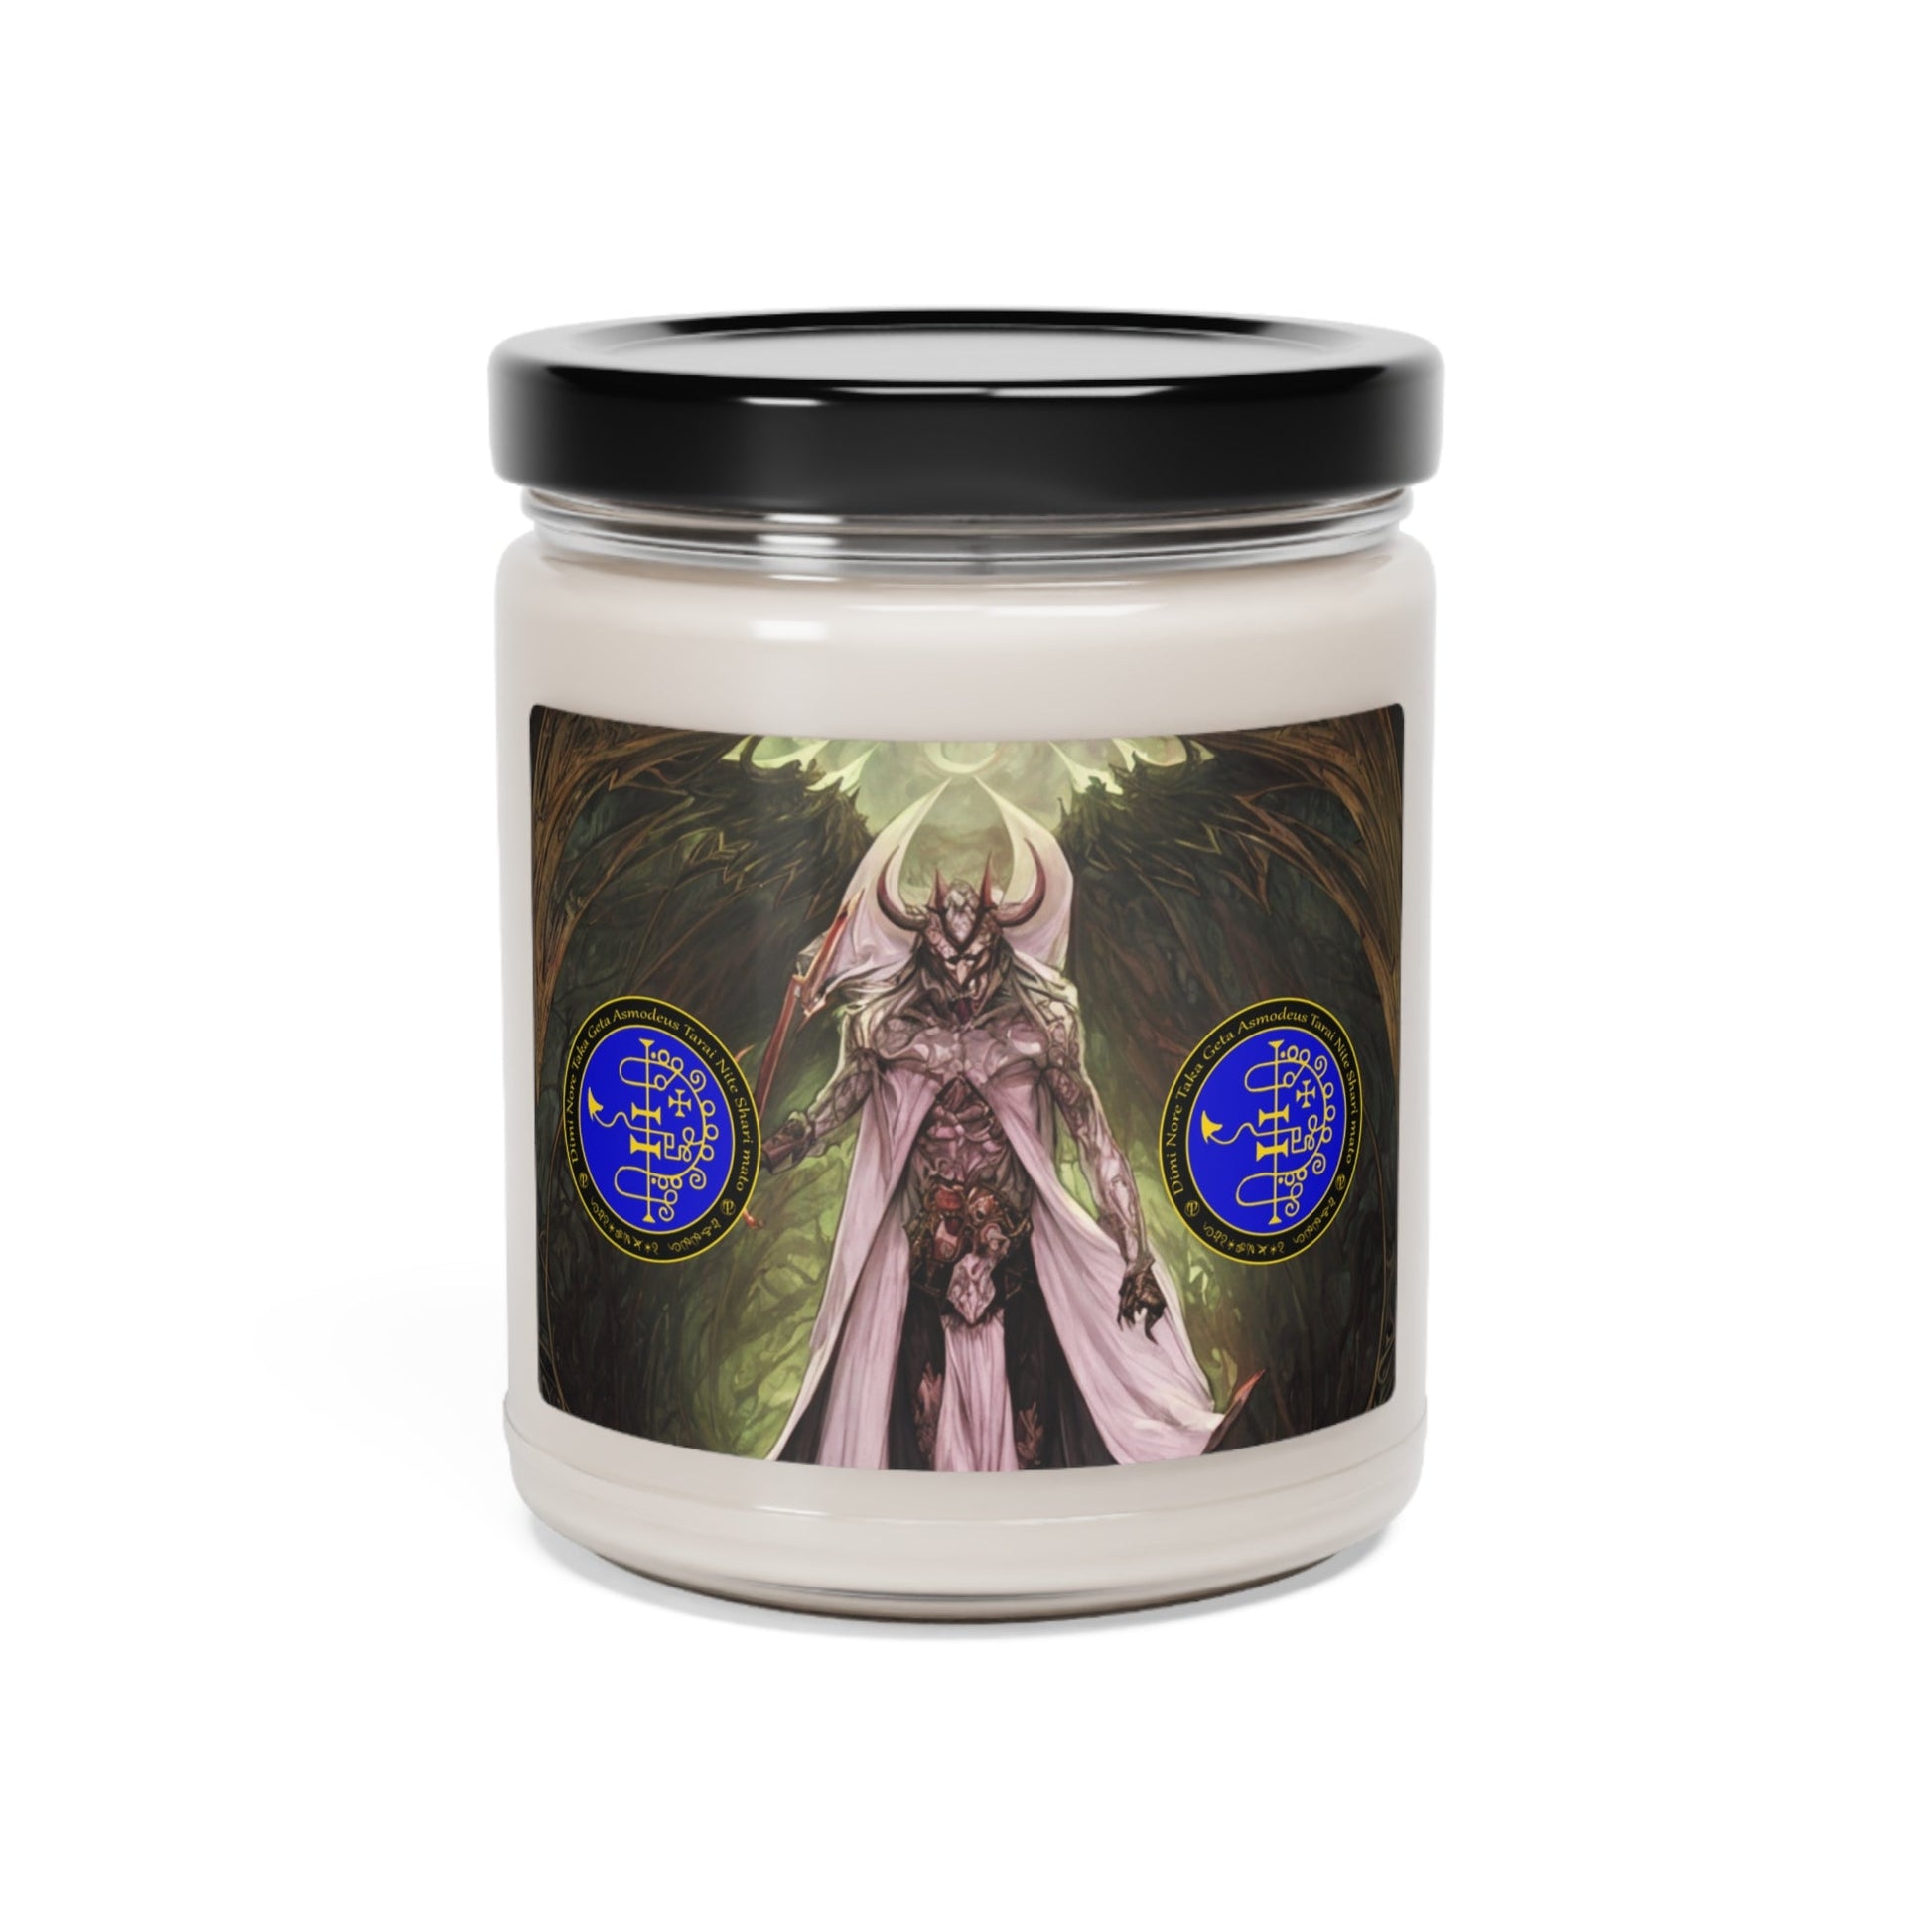 Demon-Asmodeus-Altar-Scented-Soy-Candle-for-Gambling-related-offerings-rituals-initiations-or-praying-and-meditation-11